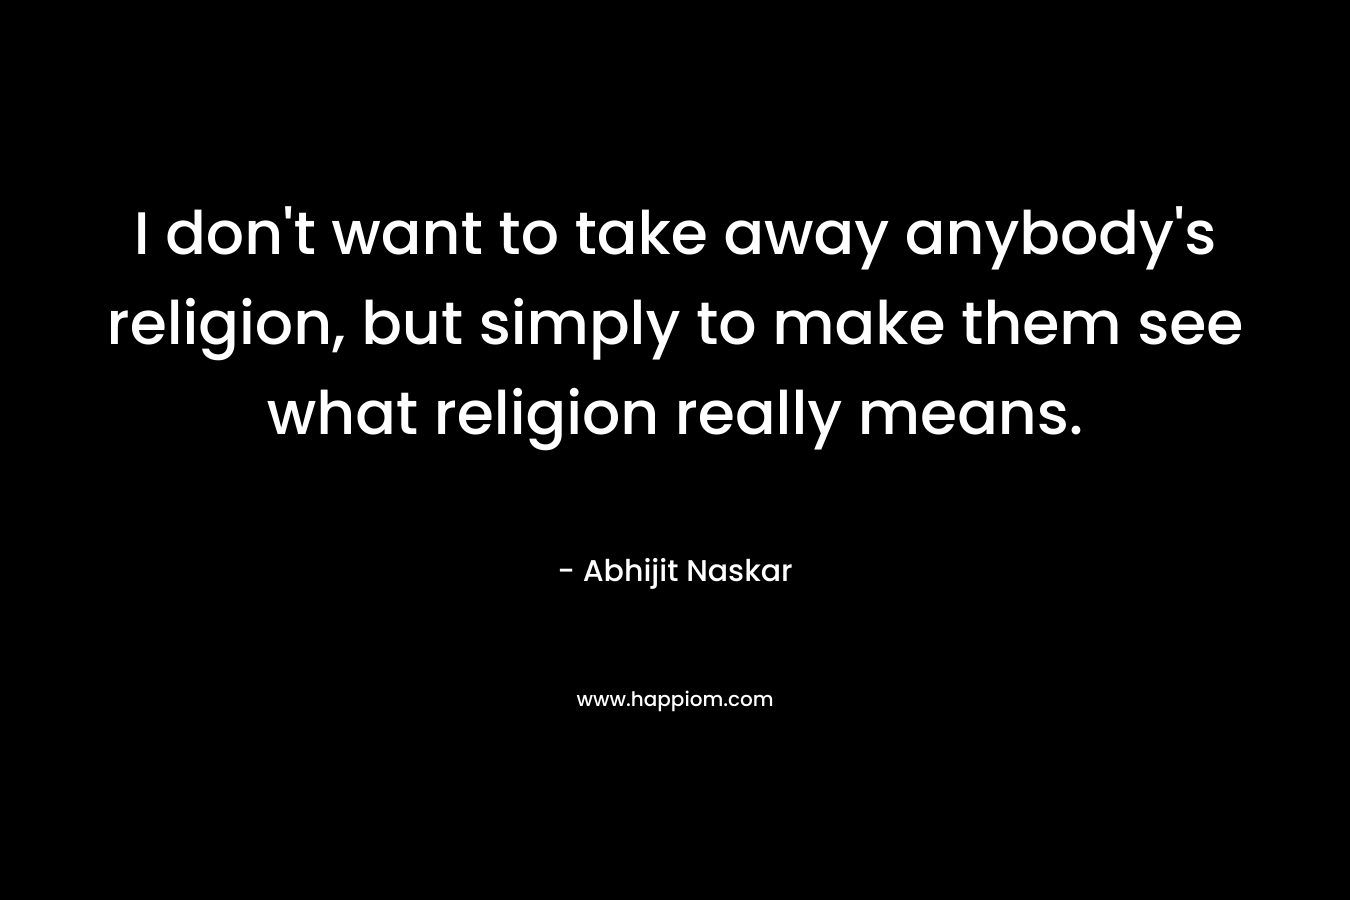 I don't want to take away anybody's religion, but simply to make them see what religion really means.